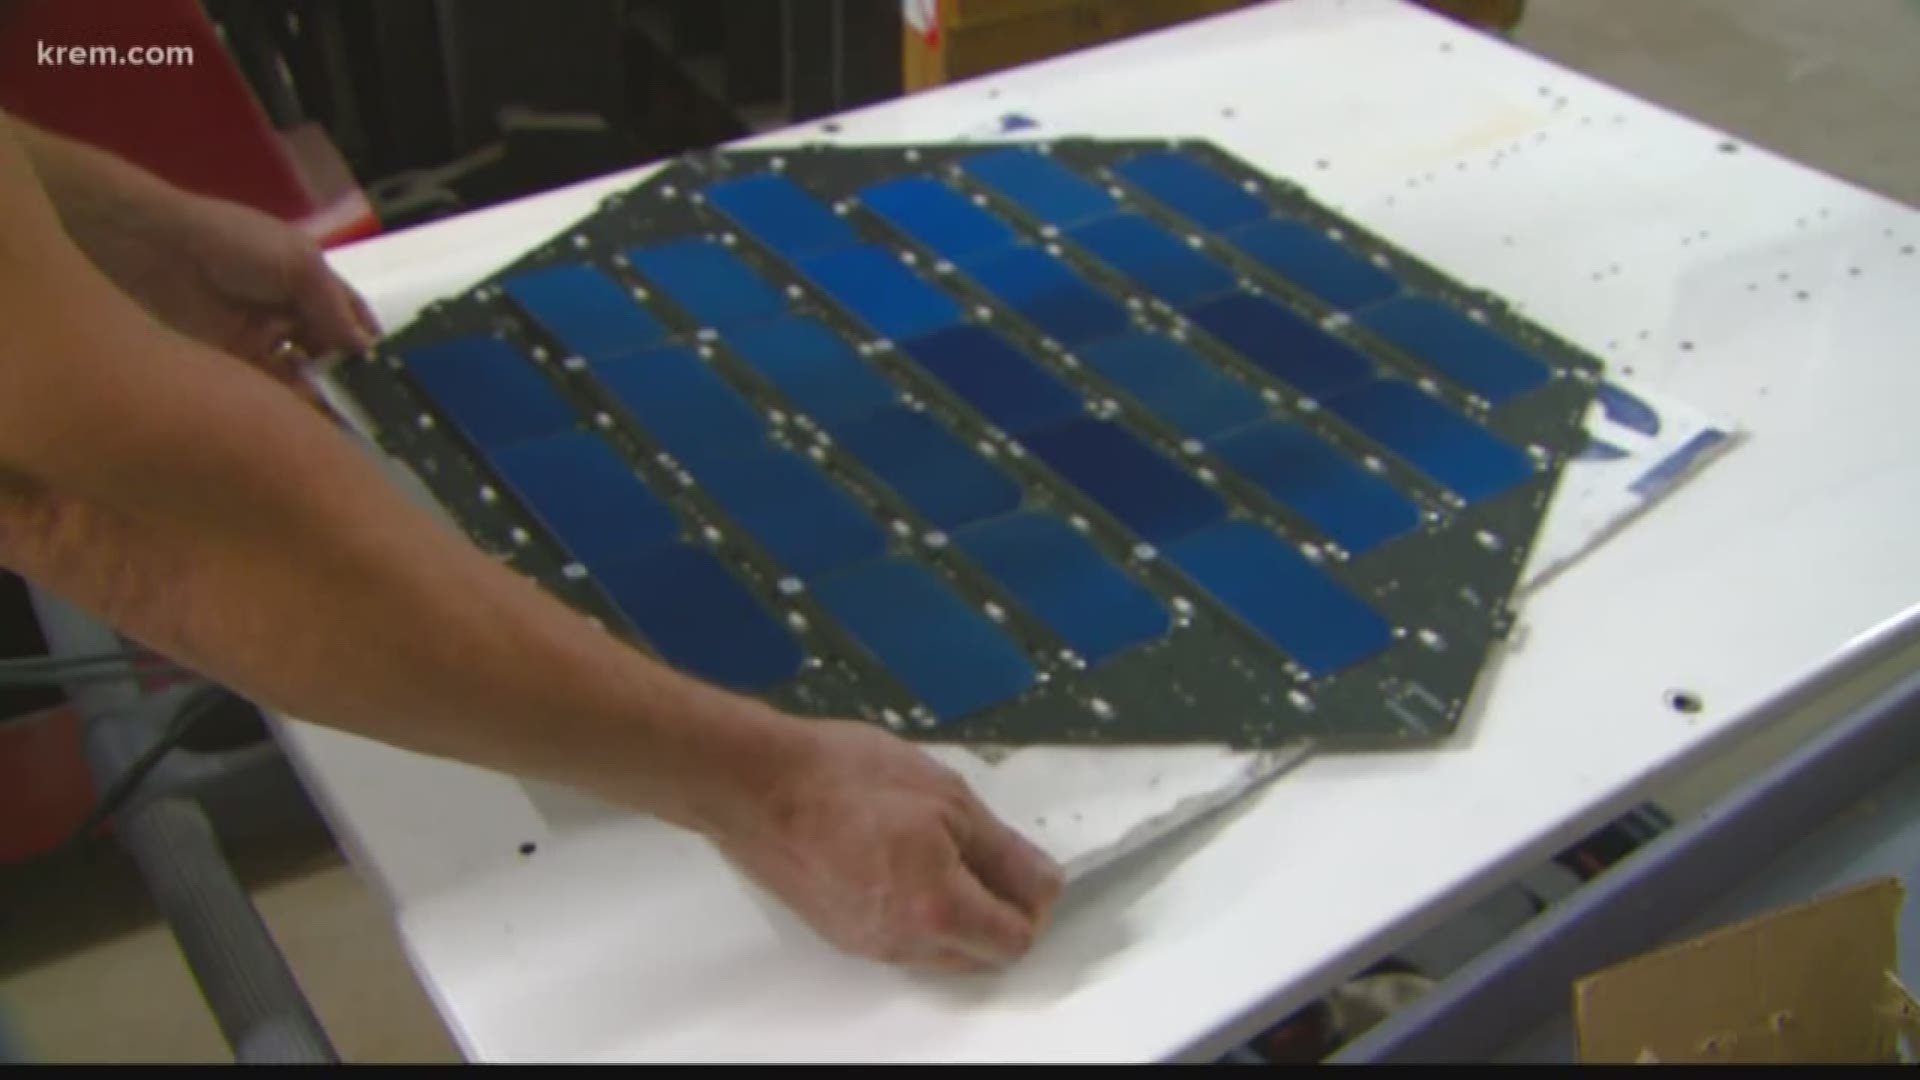 Solar Roadways leaders said the latest panels are more efficient than ever and it’s the first model that will be commercially available.